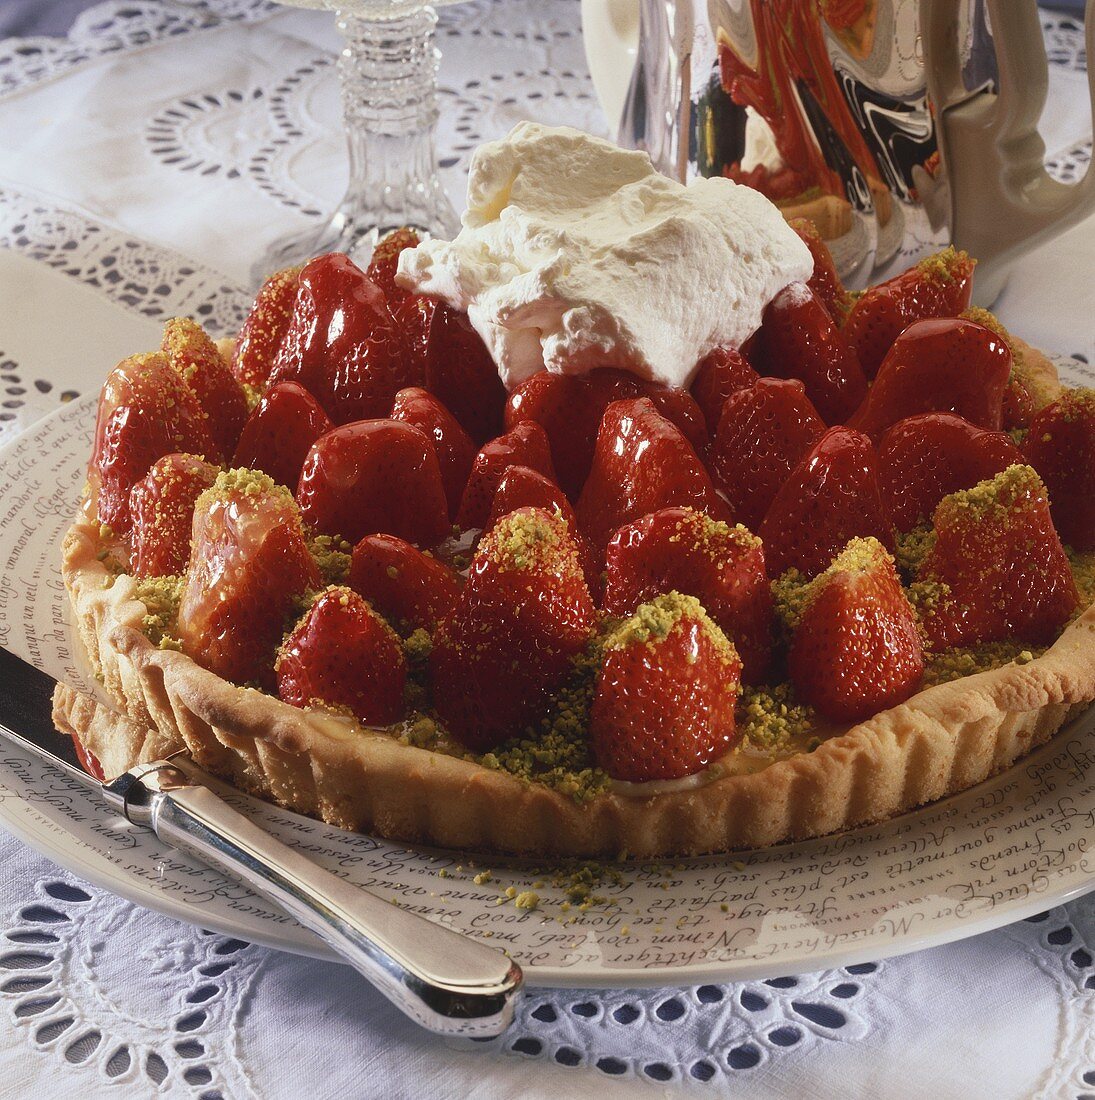 Strawberry tart with pistachios and cream